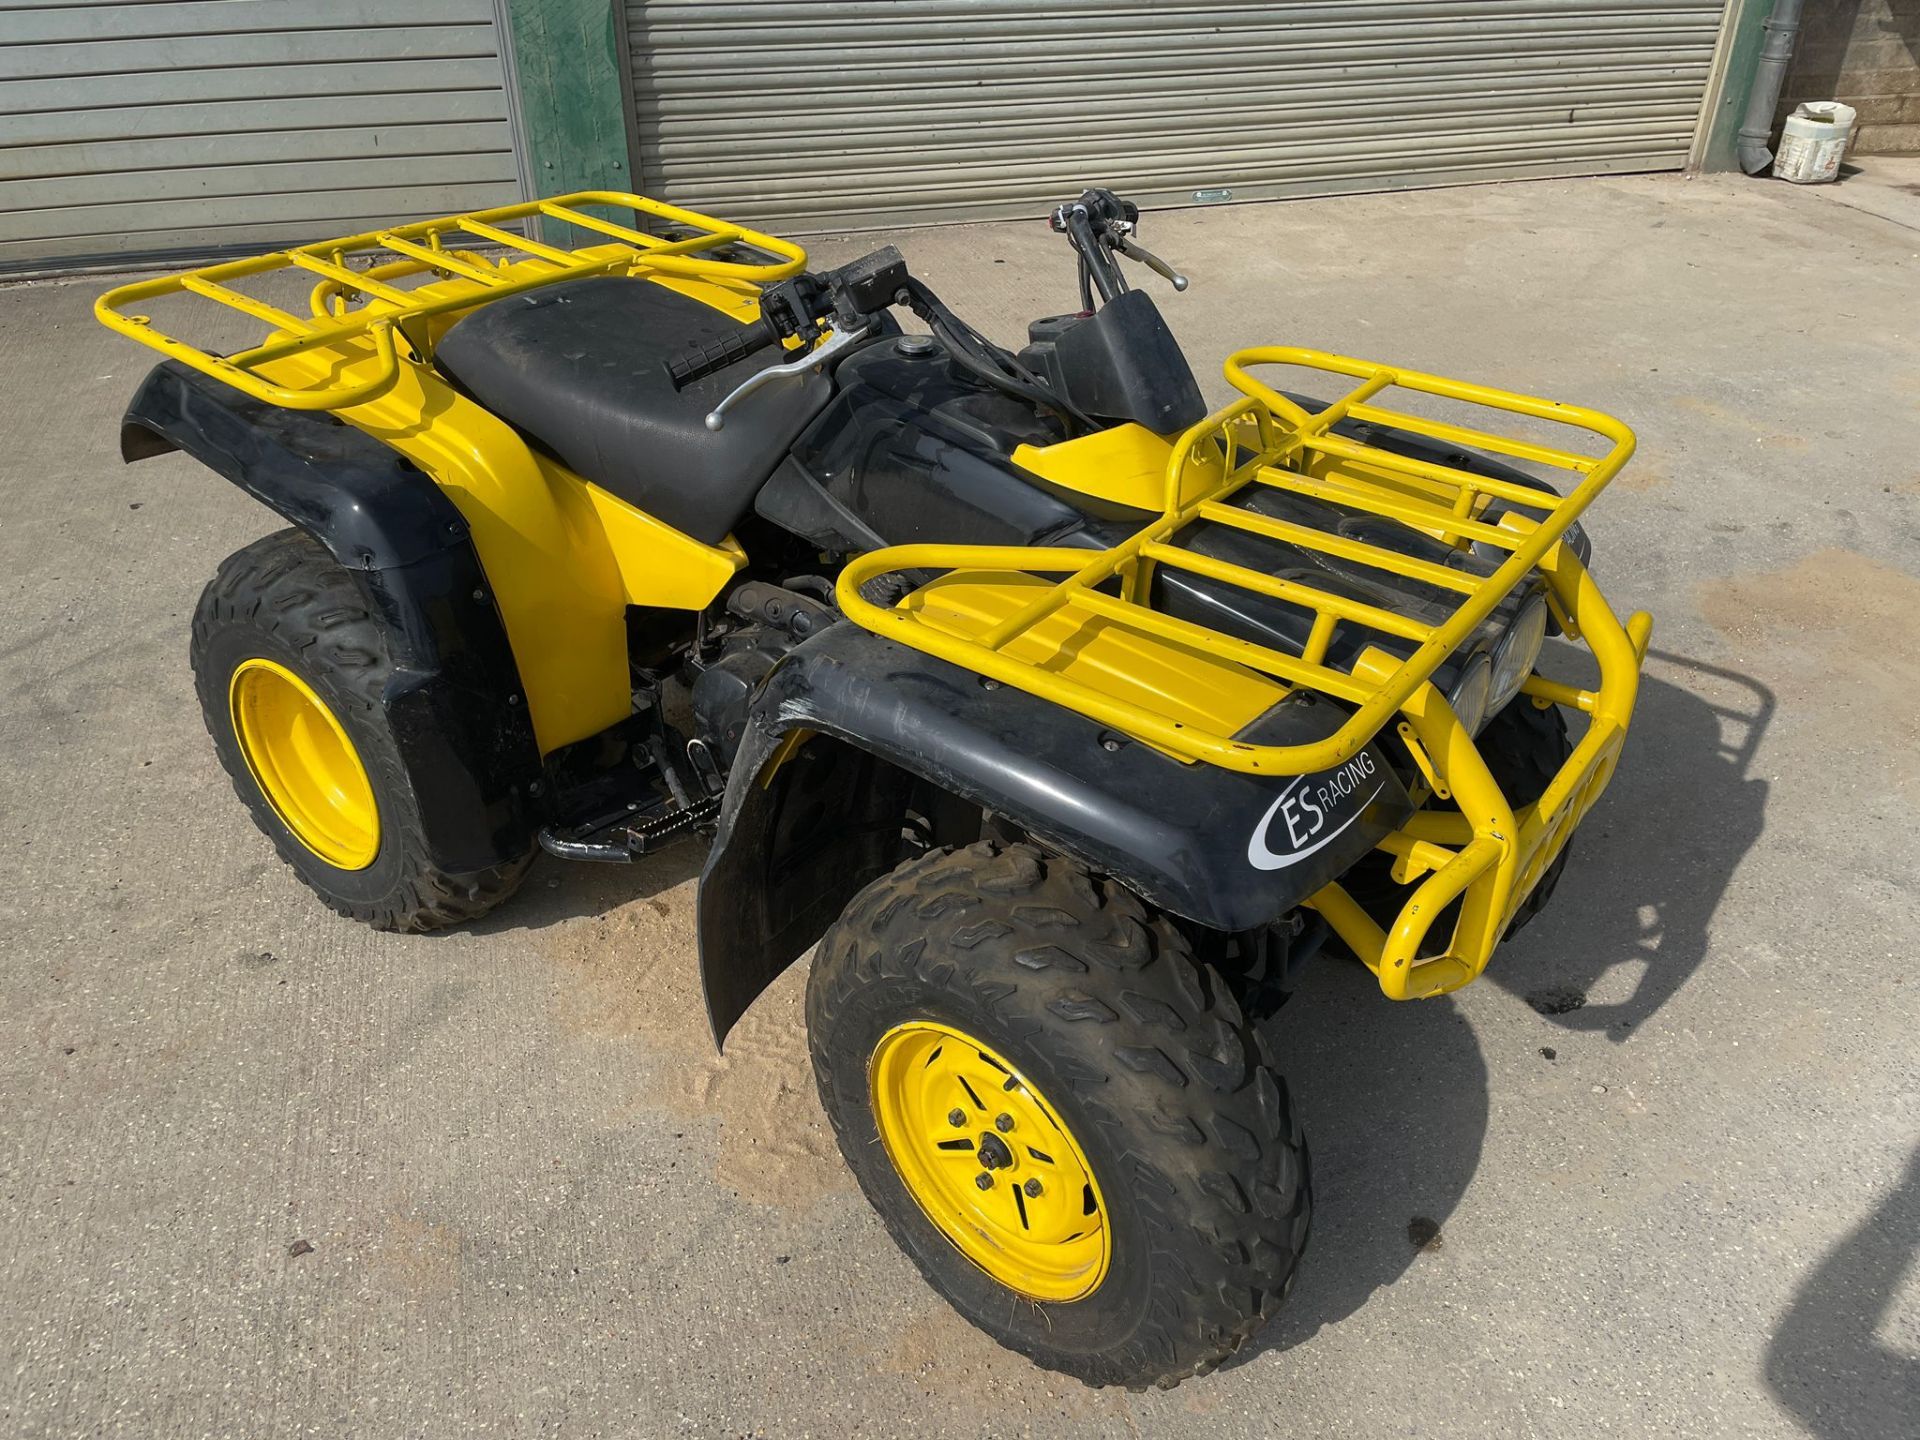 Yamaha Electric & Pull start Quad Bike, includes tow bar - Image 2 of 12